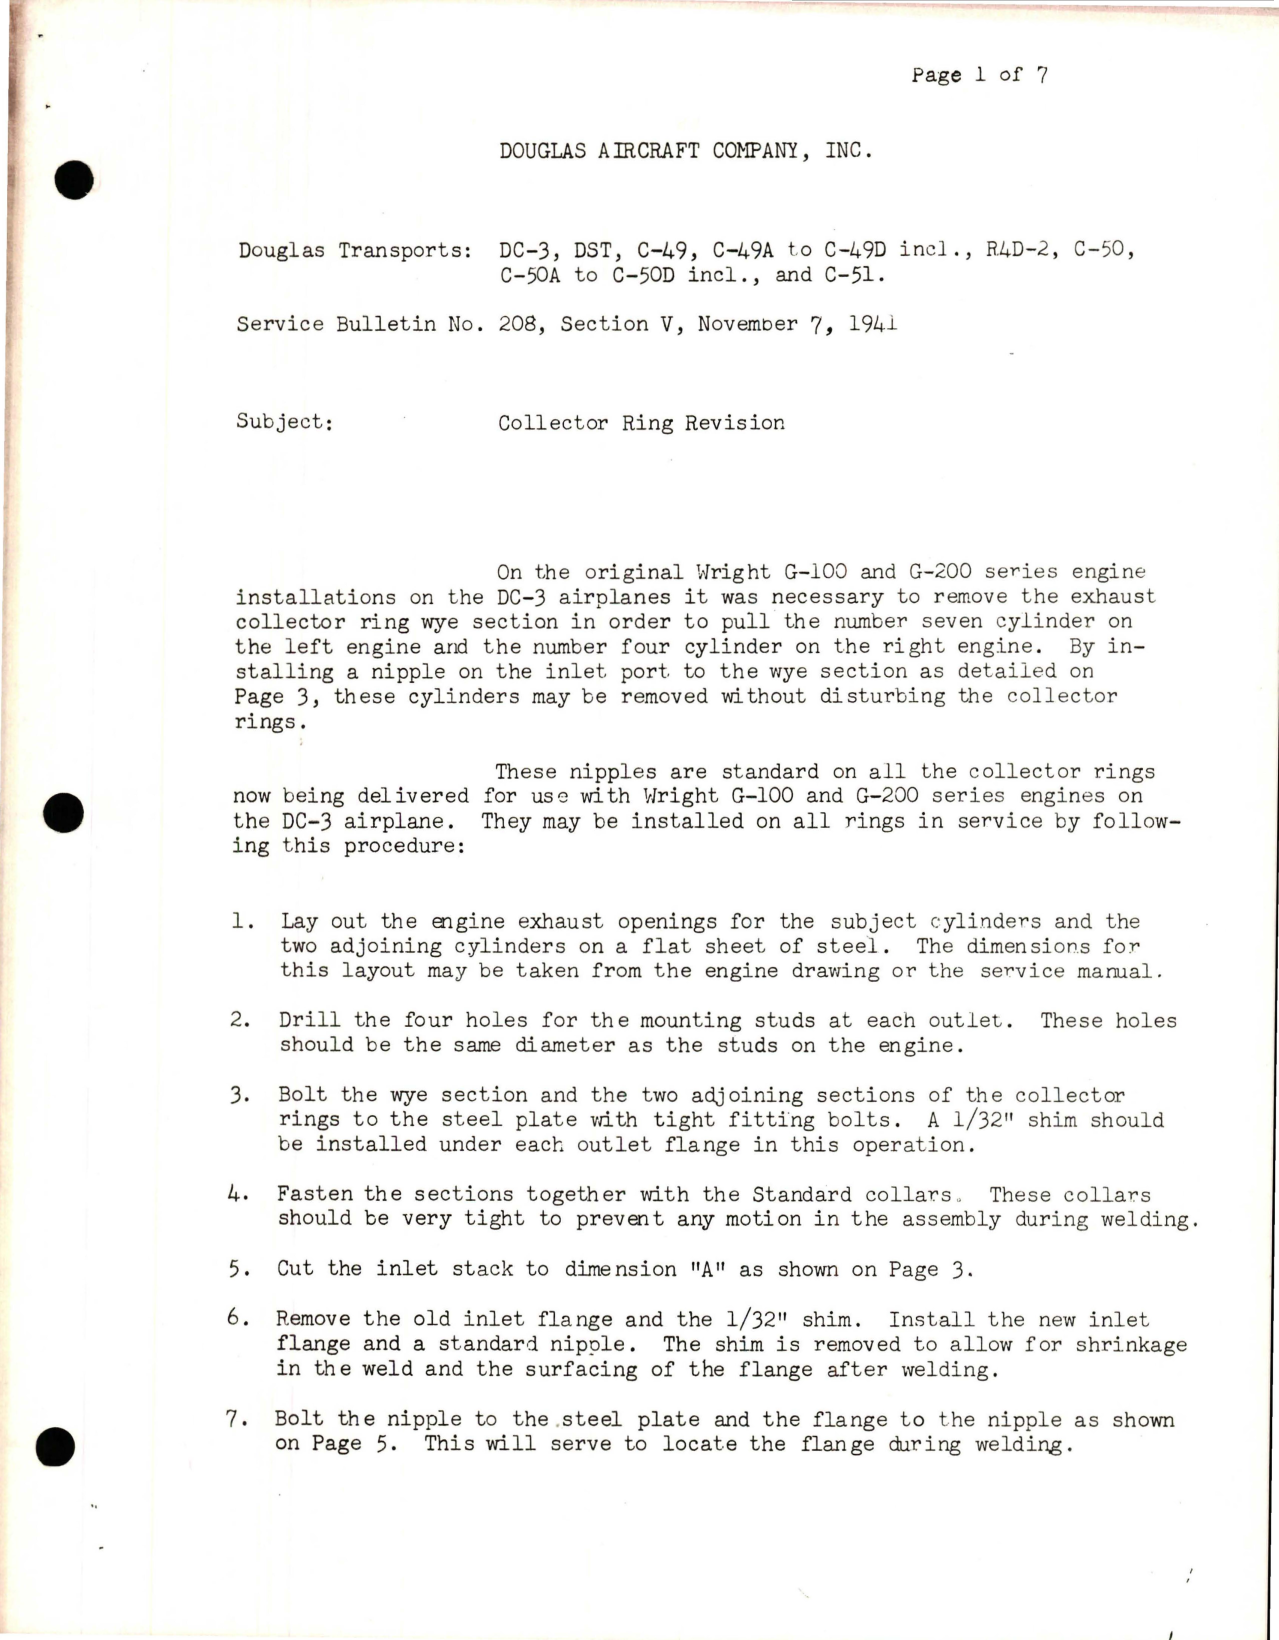 Sample page 1 from AirCorps Library document: Collector Ring Revision